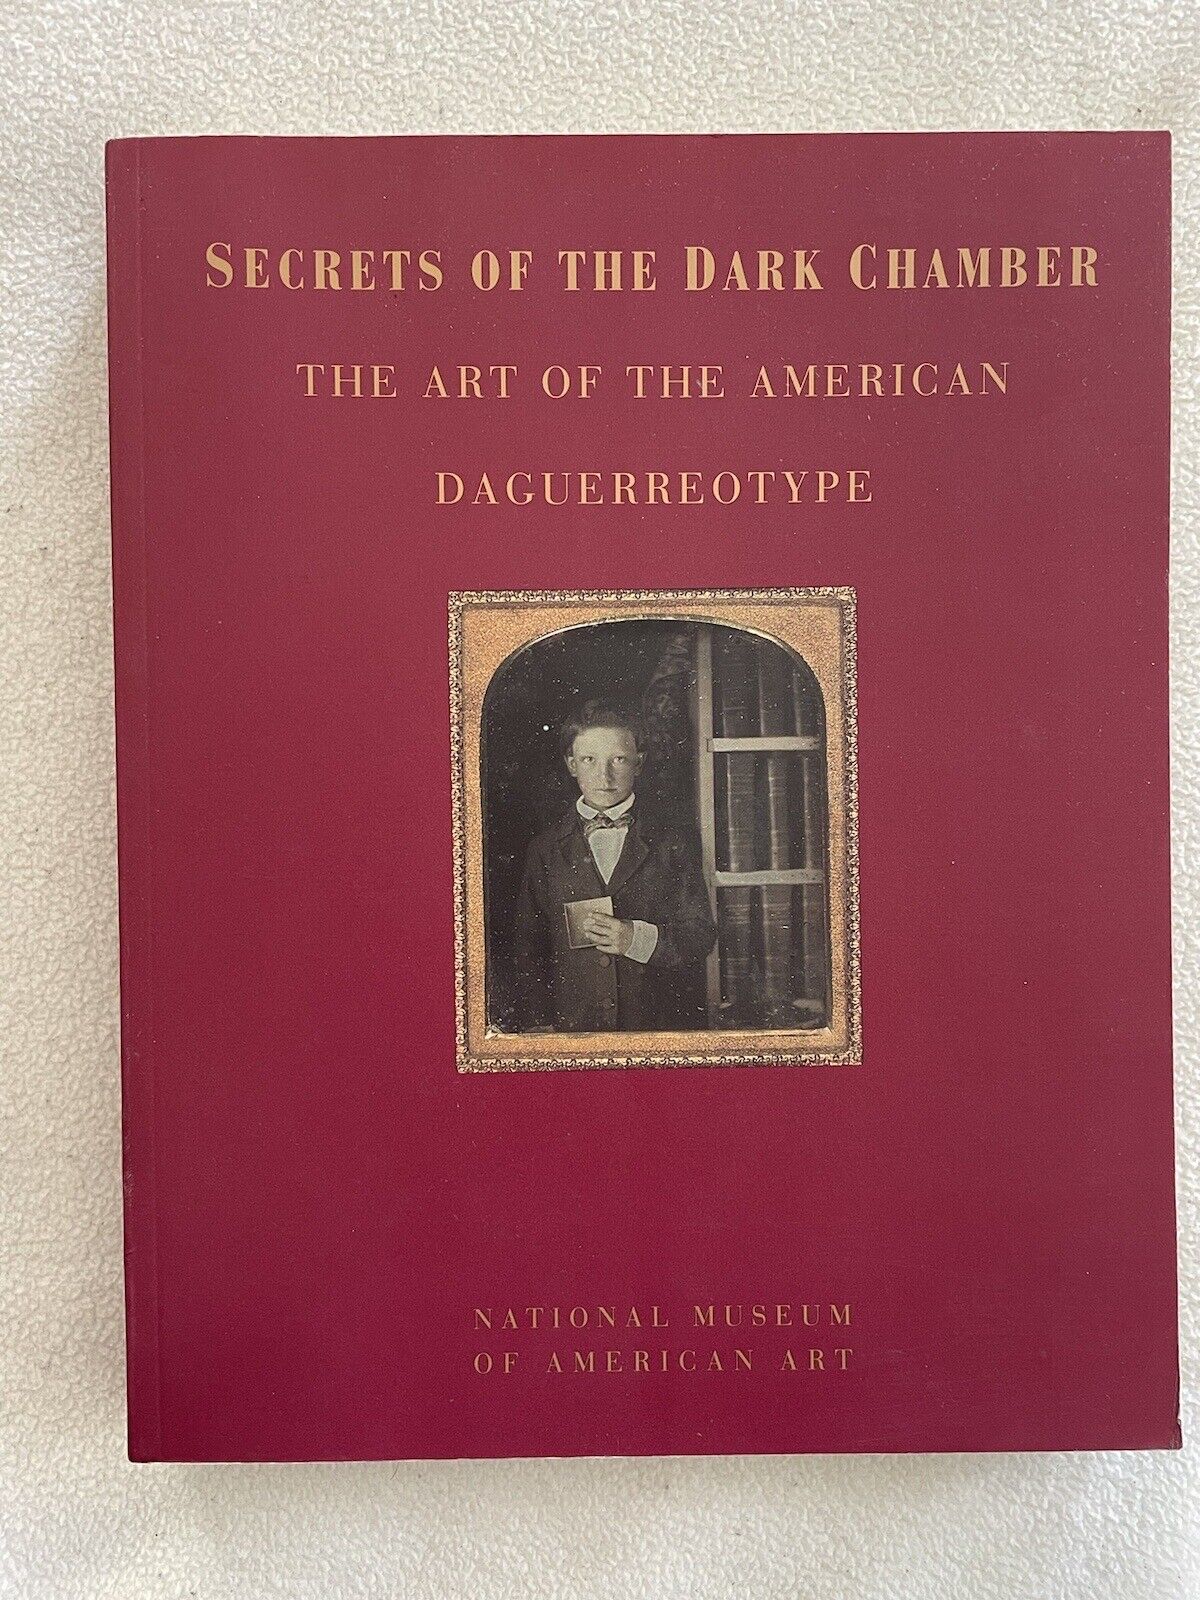 SUPER COOL SECRETS OF THE DARK CHAMBER: THE ART OF THE AMERICAN DAGUERROTYPE